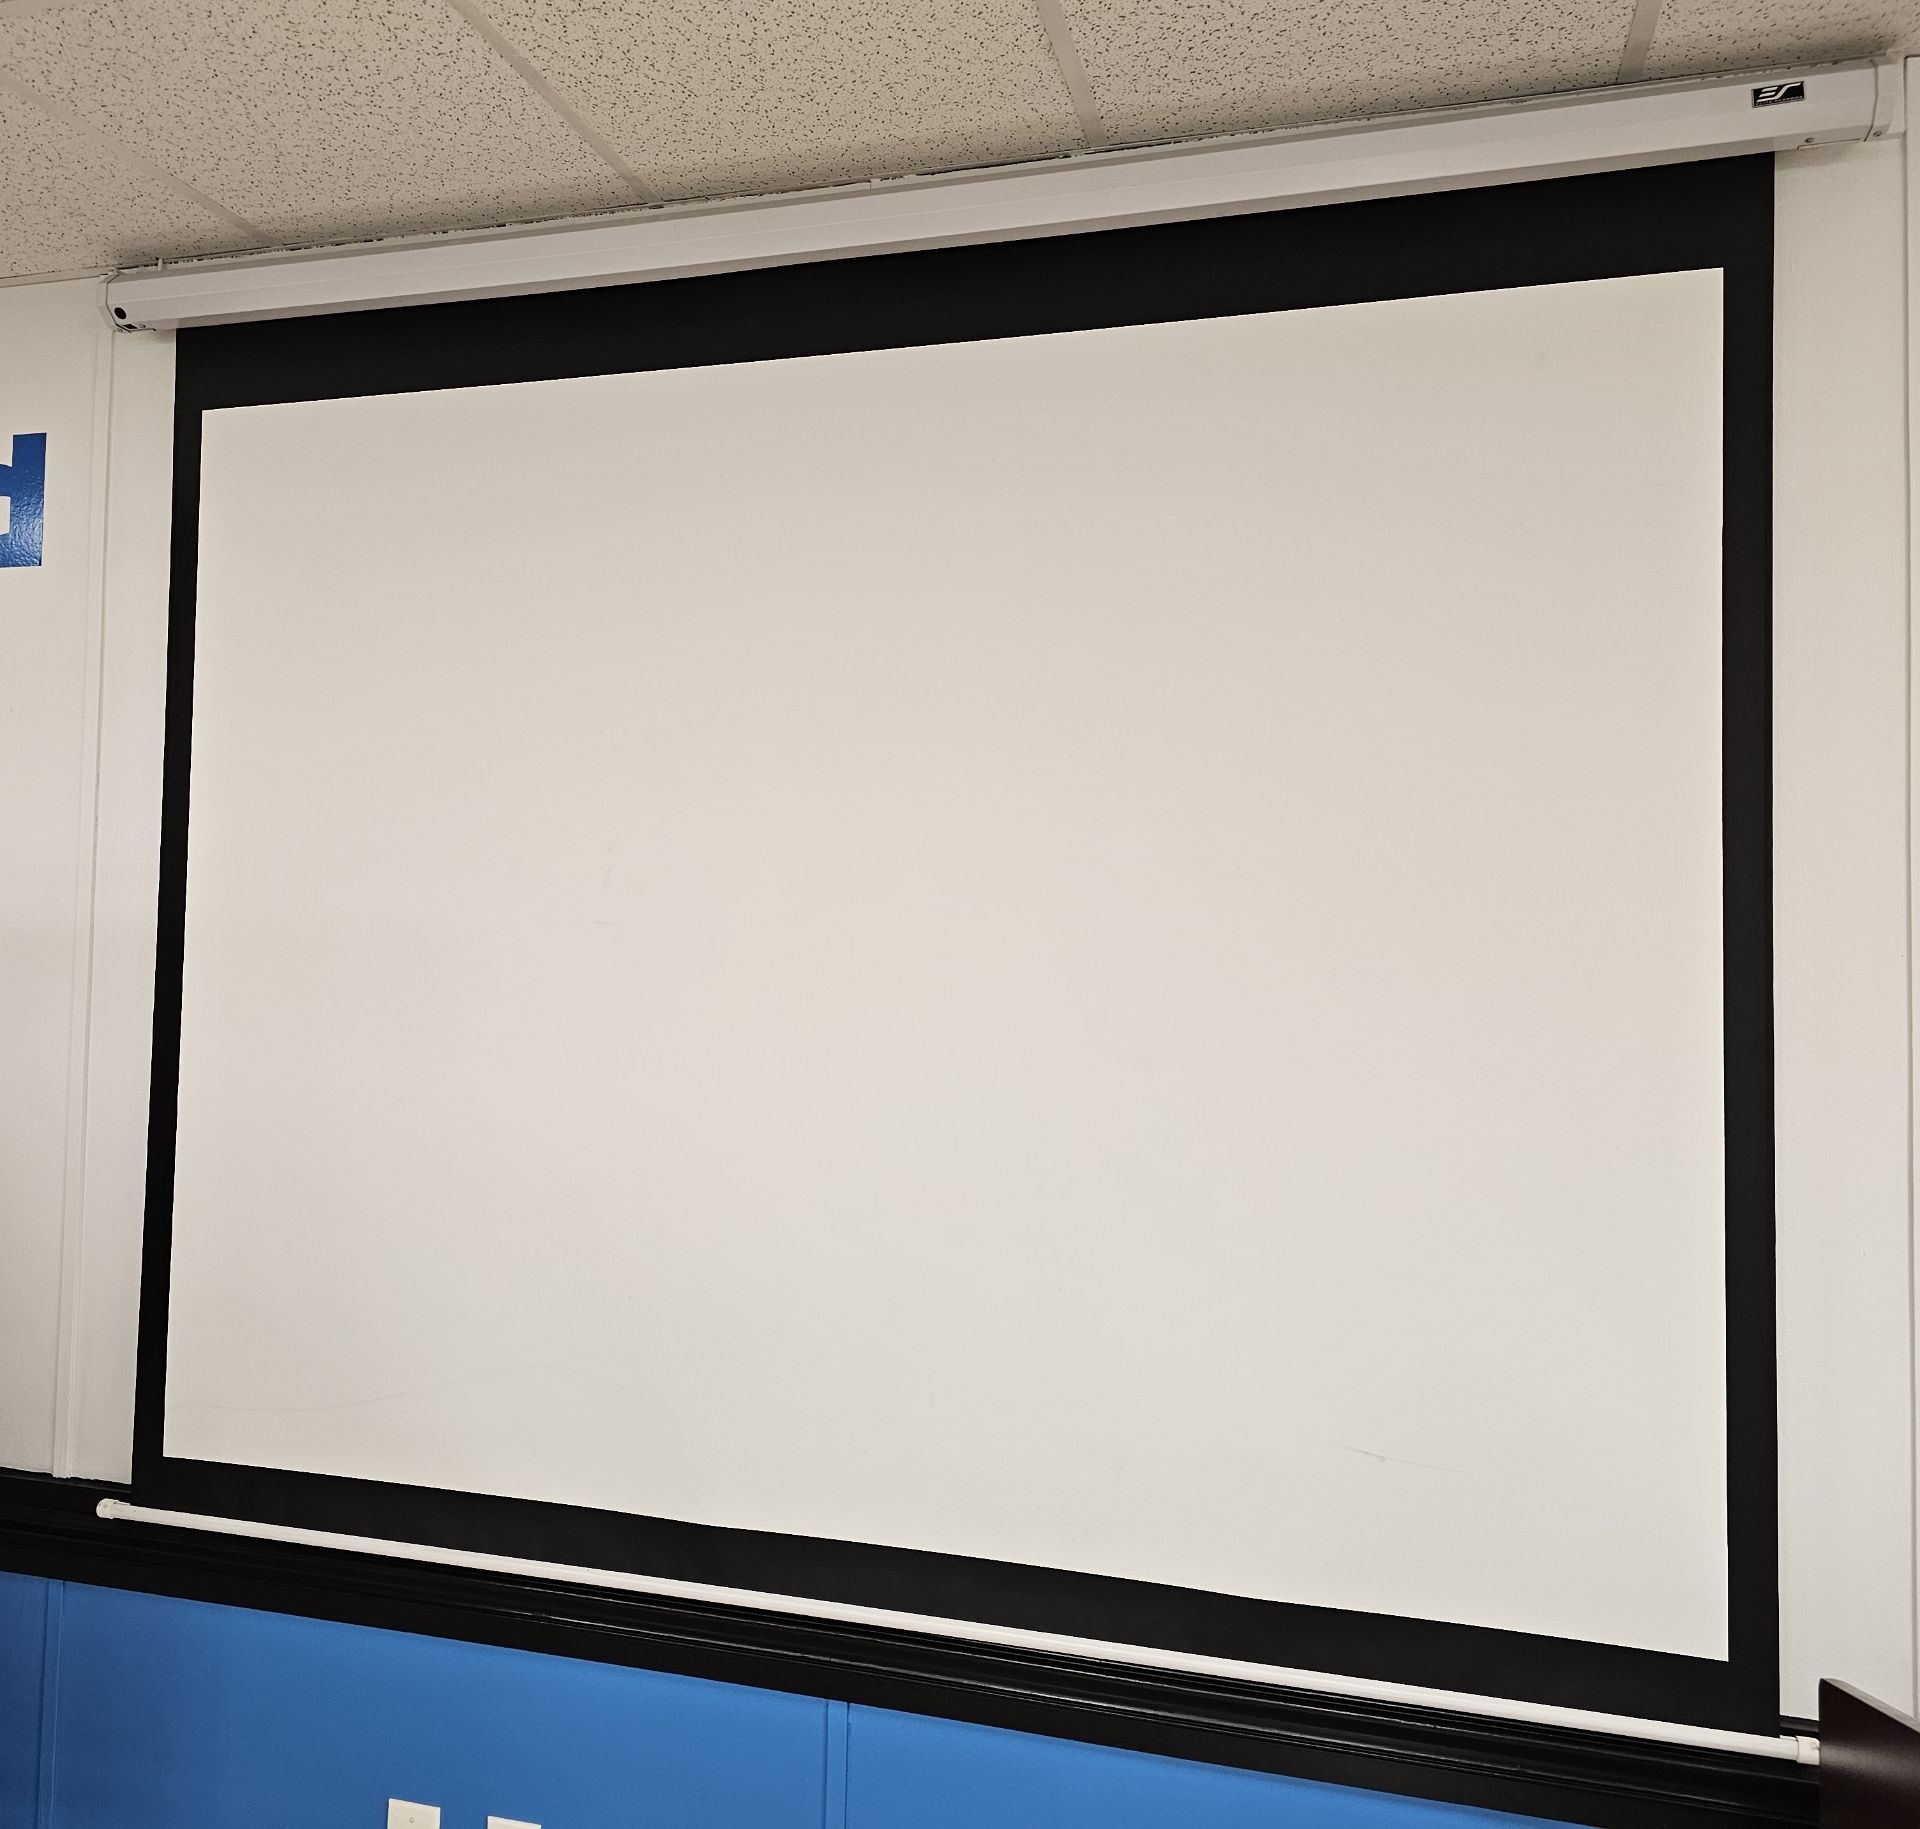 NEC Projector & Screen - Image 4 of 4